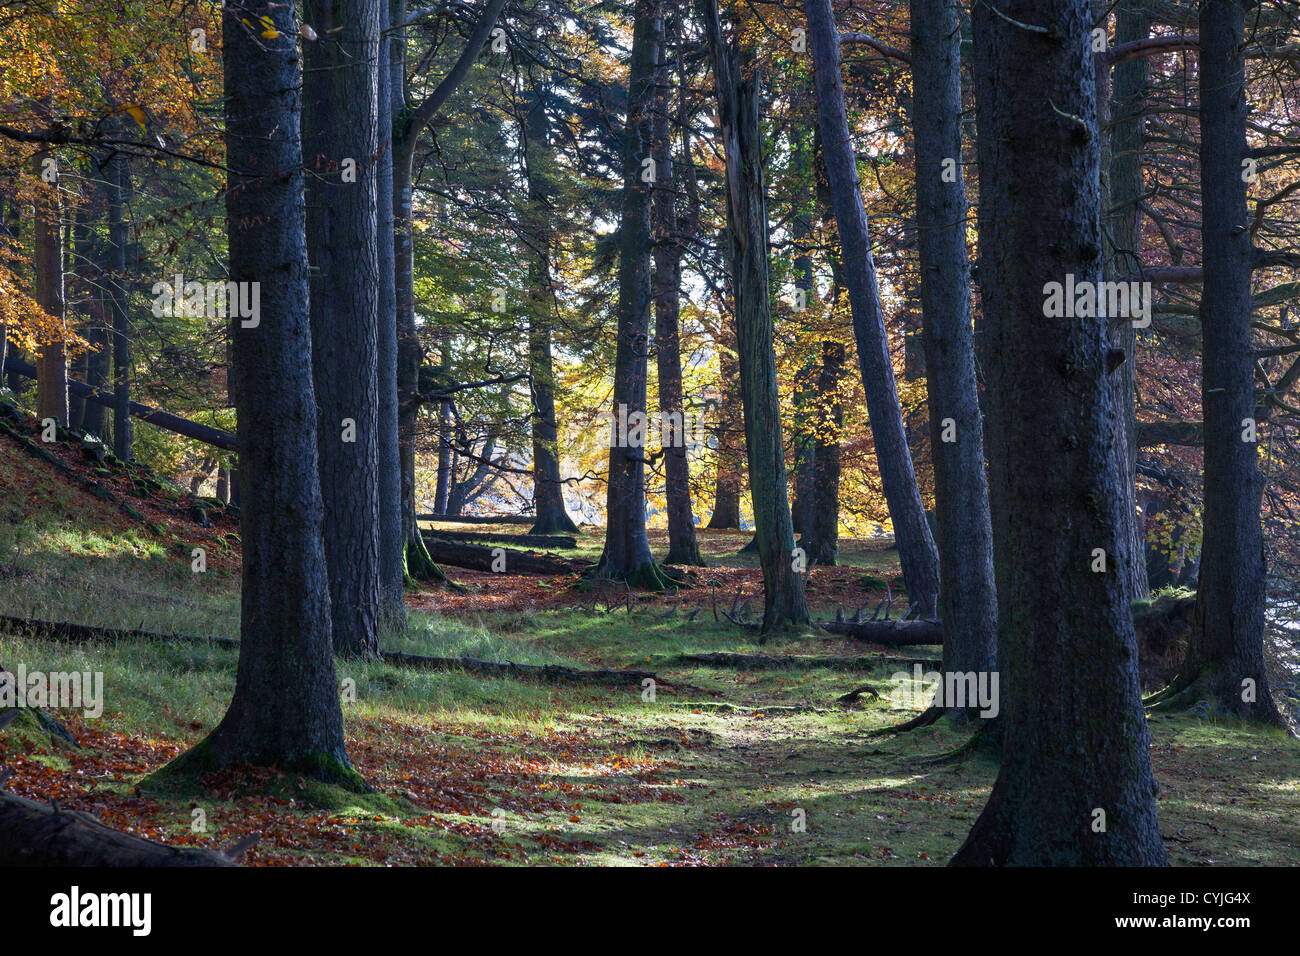 Mixed Woodland Containing Deciduous and None Deciduous Pine Trees in Autumn UK Stock Photo